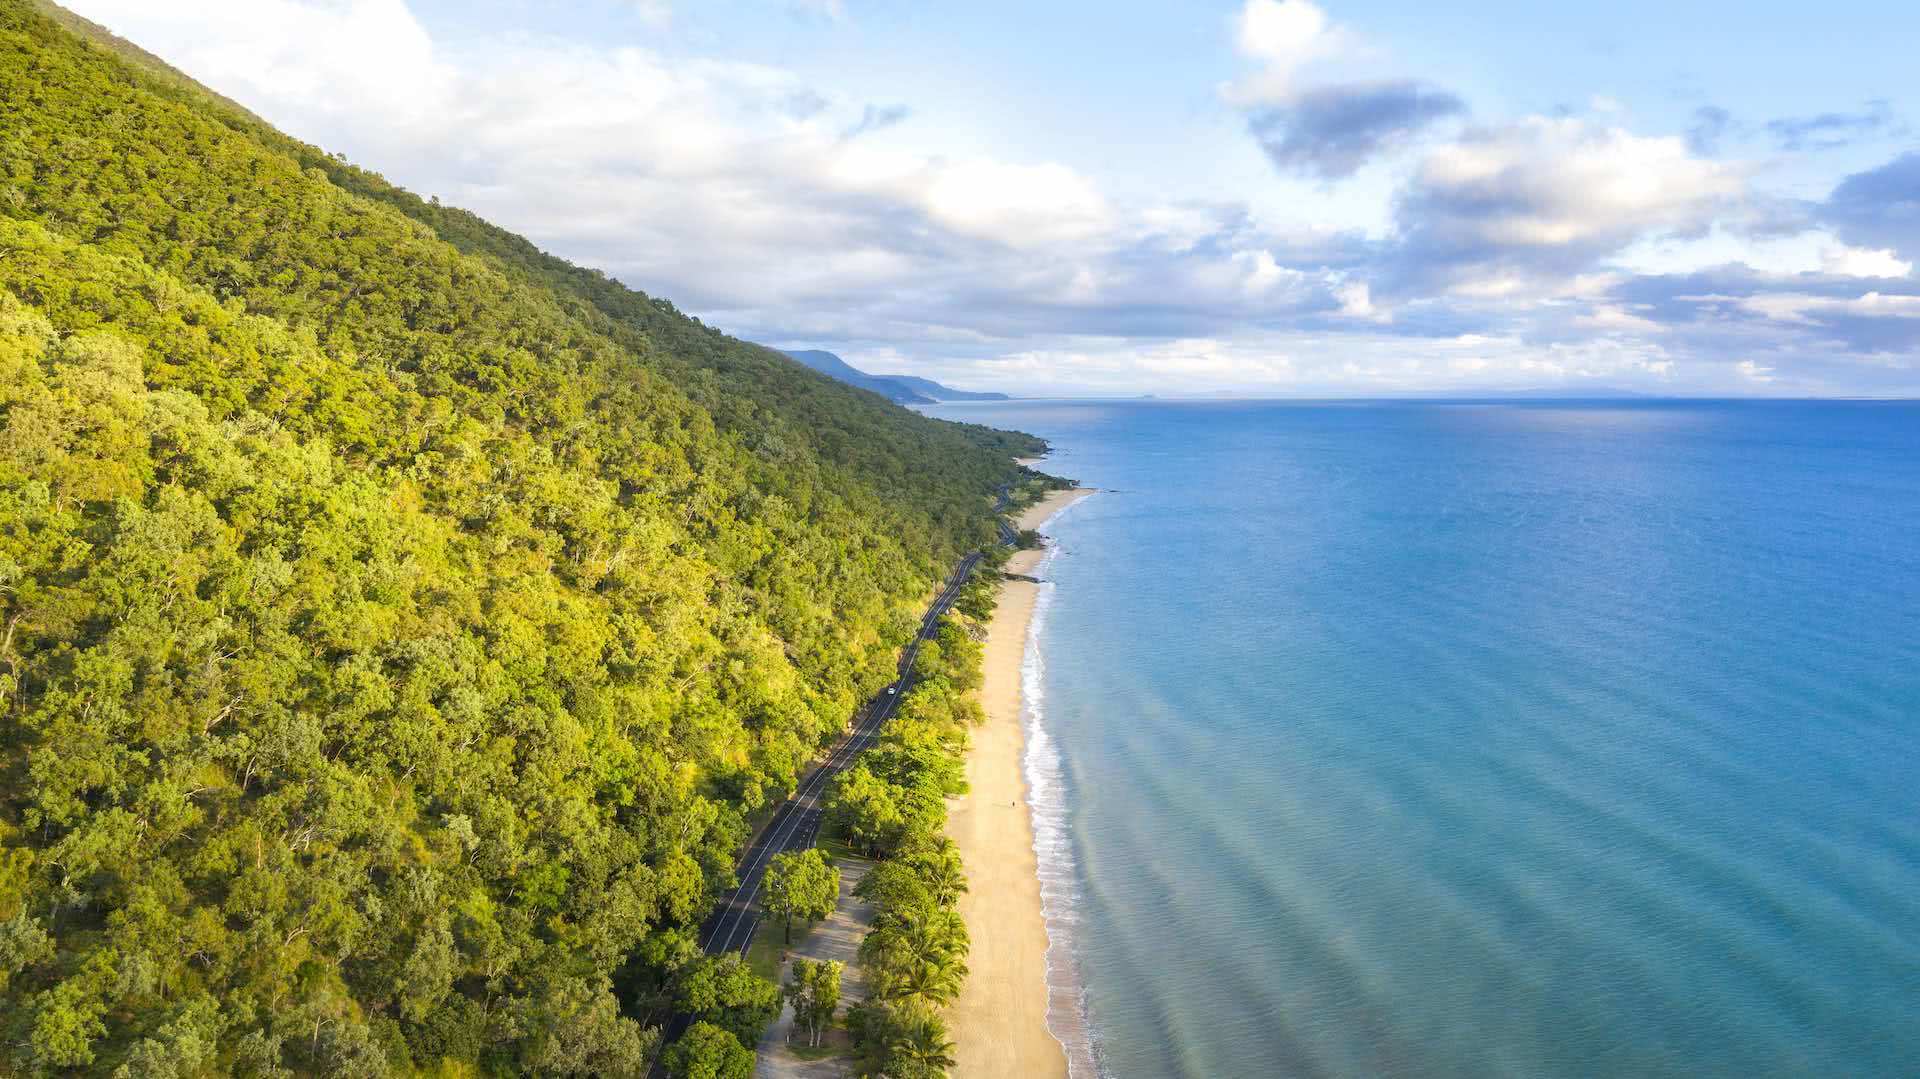 Top 10 Road Trips in Queensland, photo by Tourism and Events Queensland, Amy Fairall, daintree rainforest, ocean, great barrier reef, ocean, sand